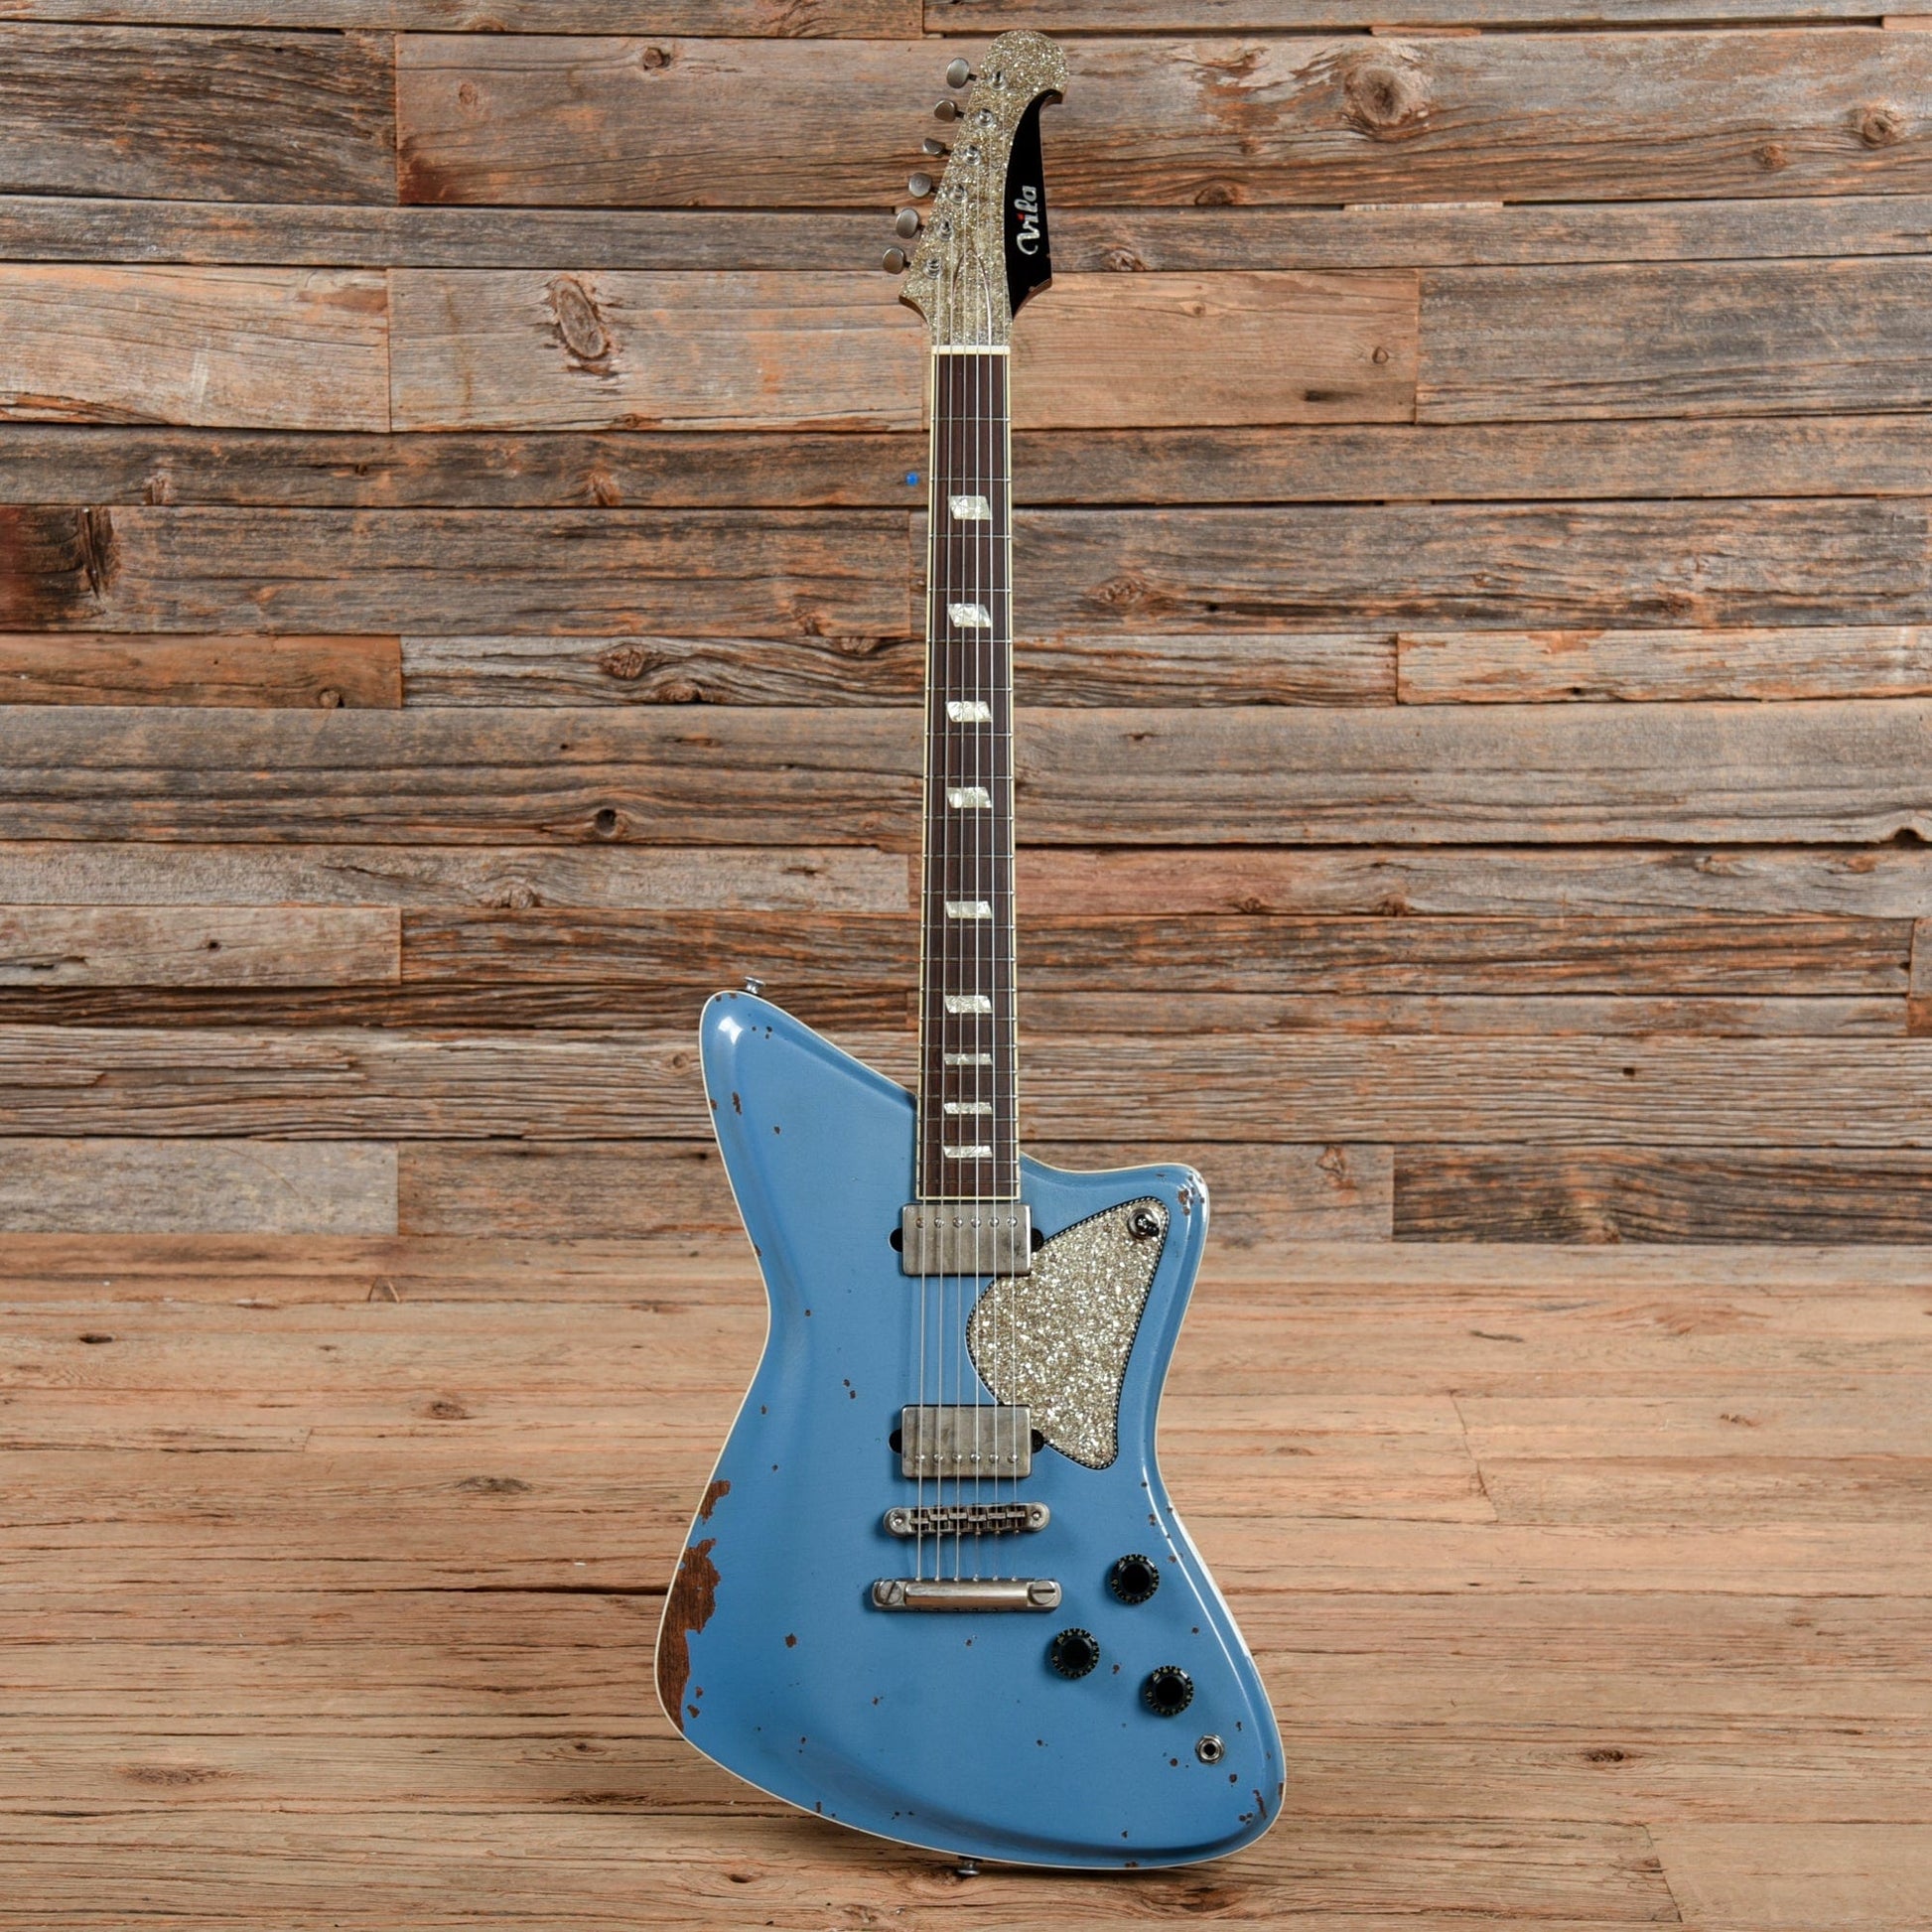 Diego Vila Customs Austral Pola Peacock Blue Relic 2021 Electric Guitars / Solid Body